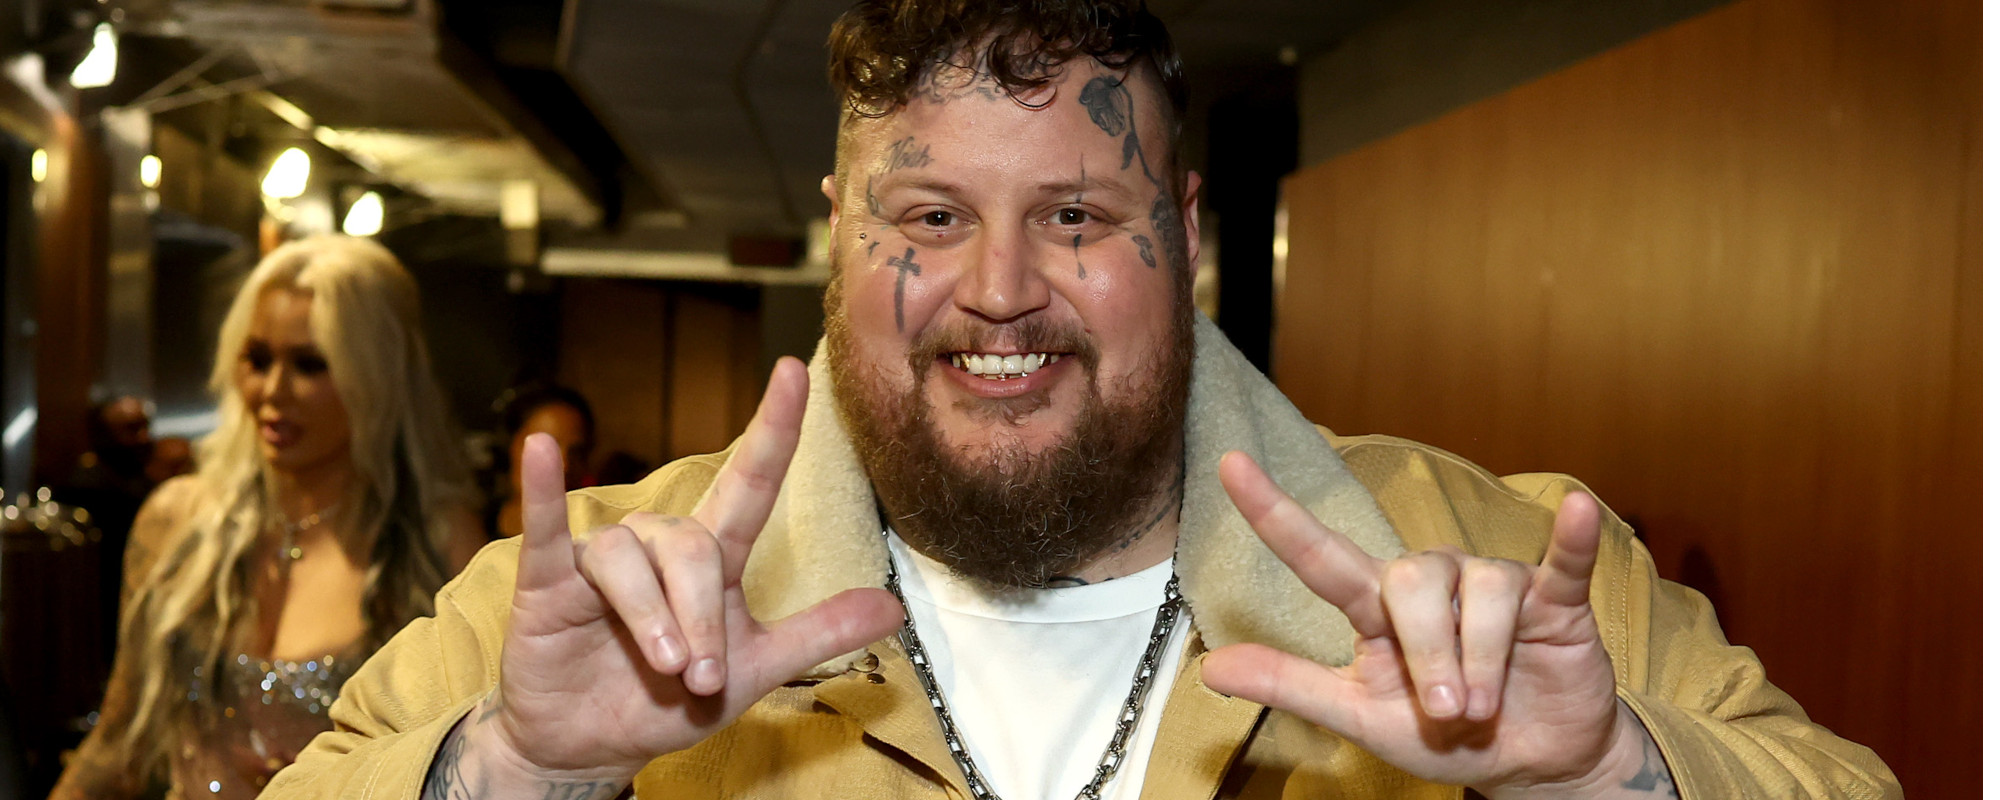 Fans Put GRAMMYs on Blast Over Jelly Roll Robbery, Call It a “Slap in the Face”